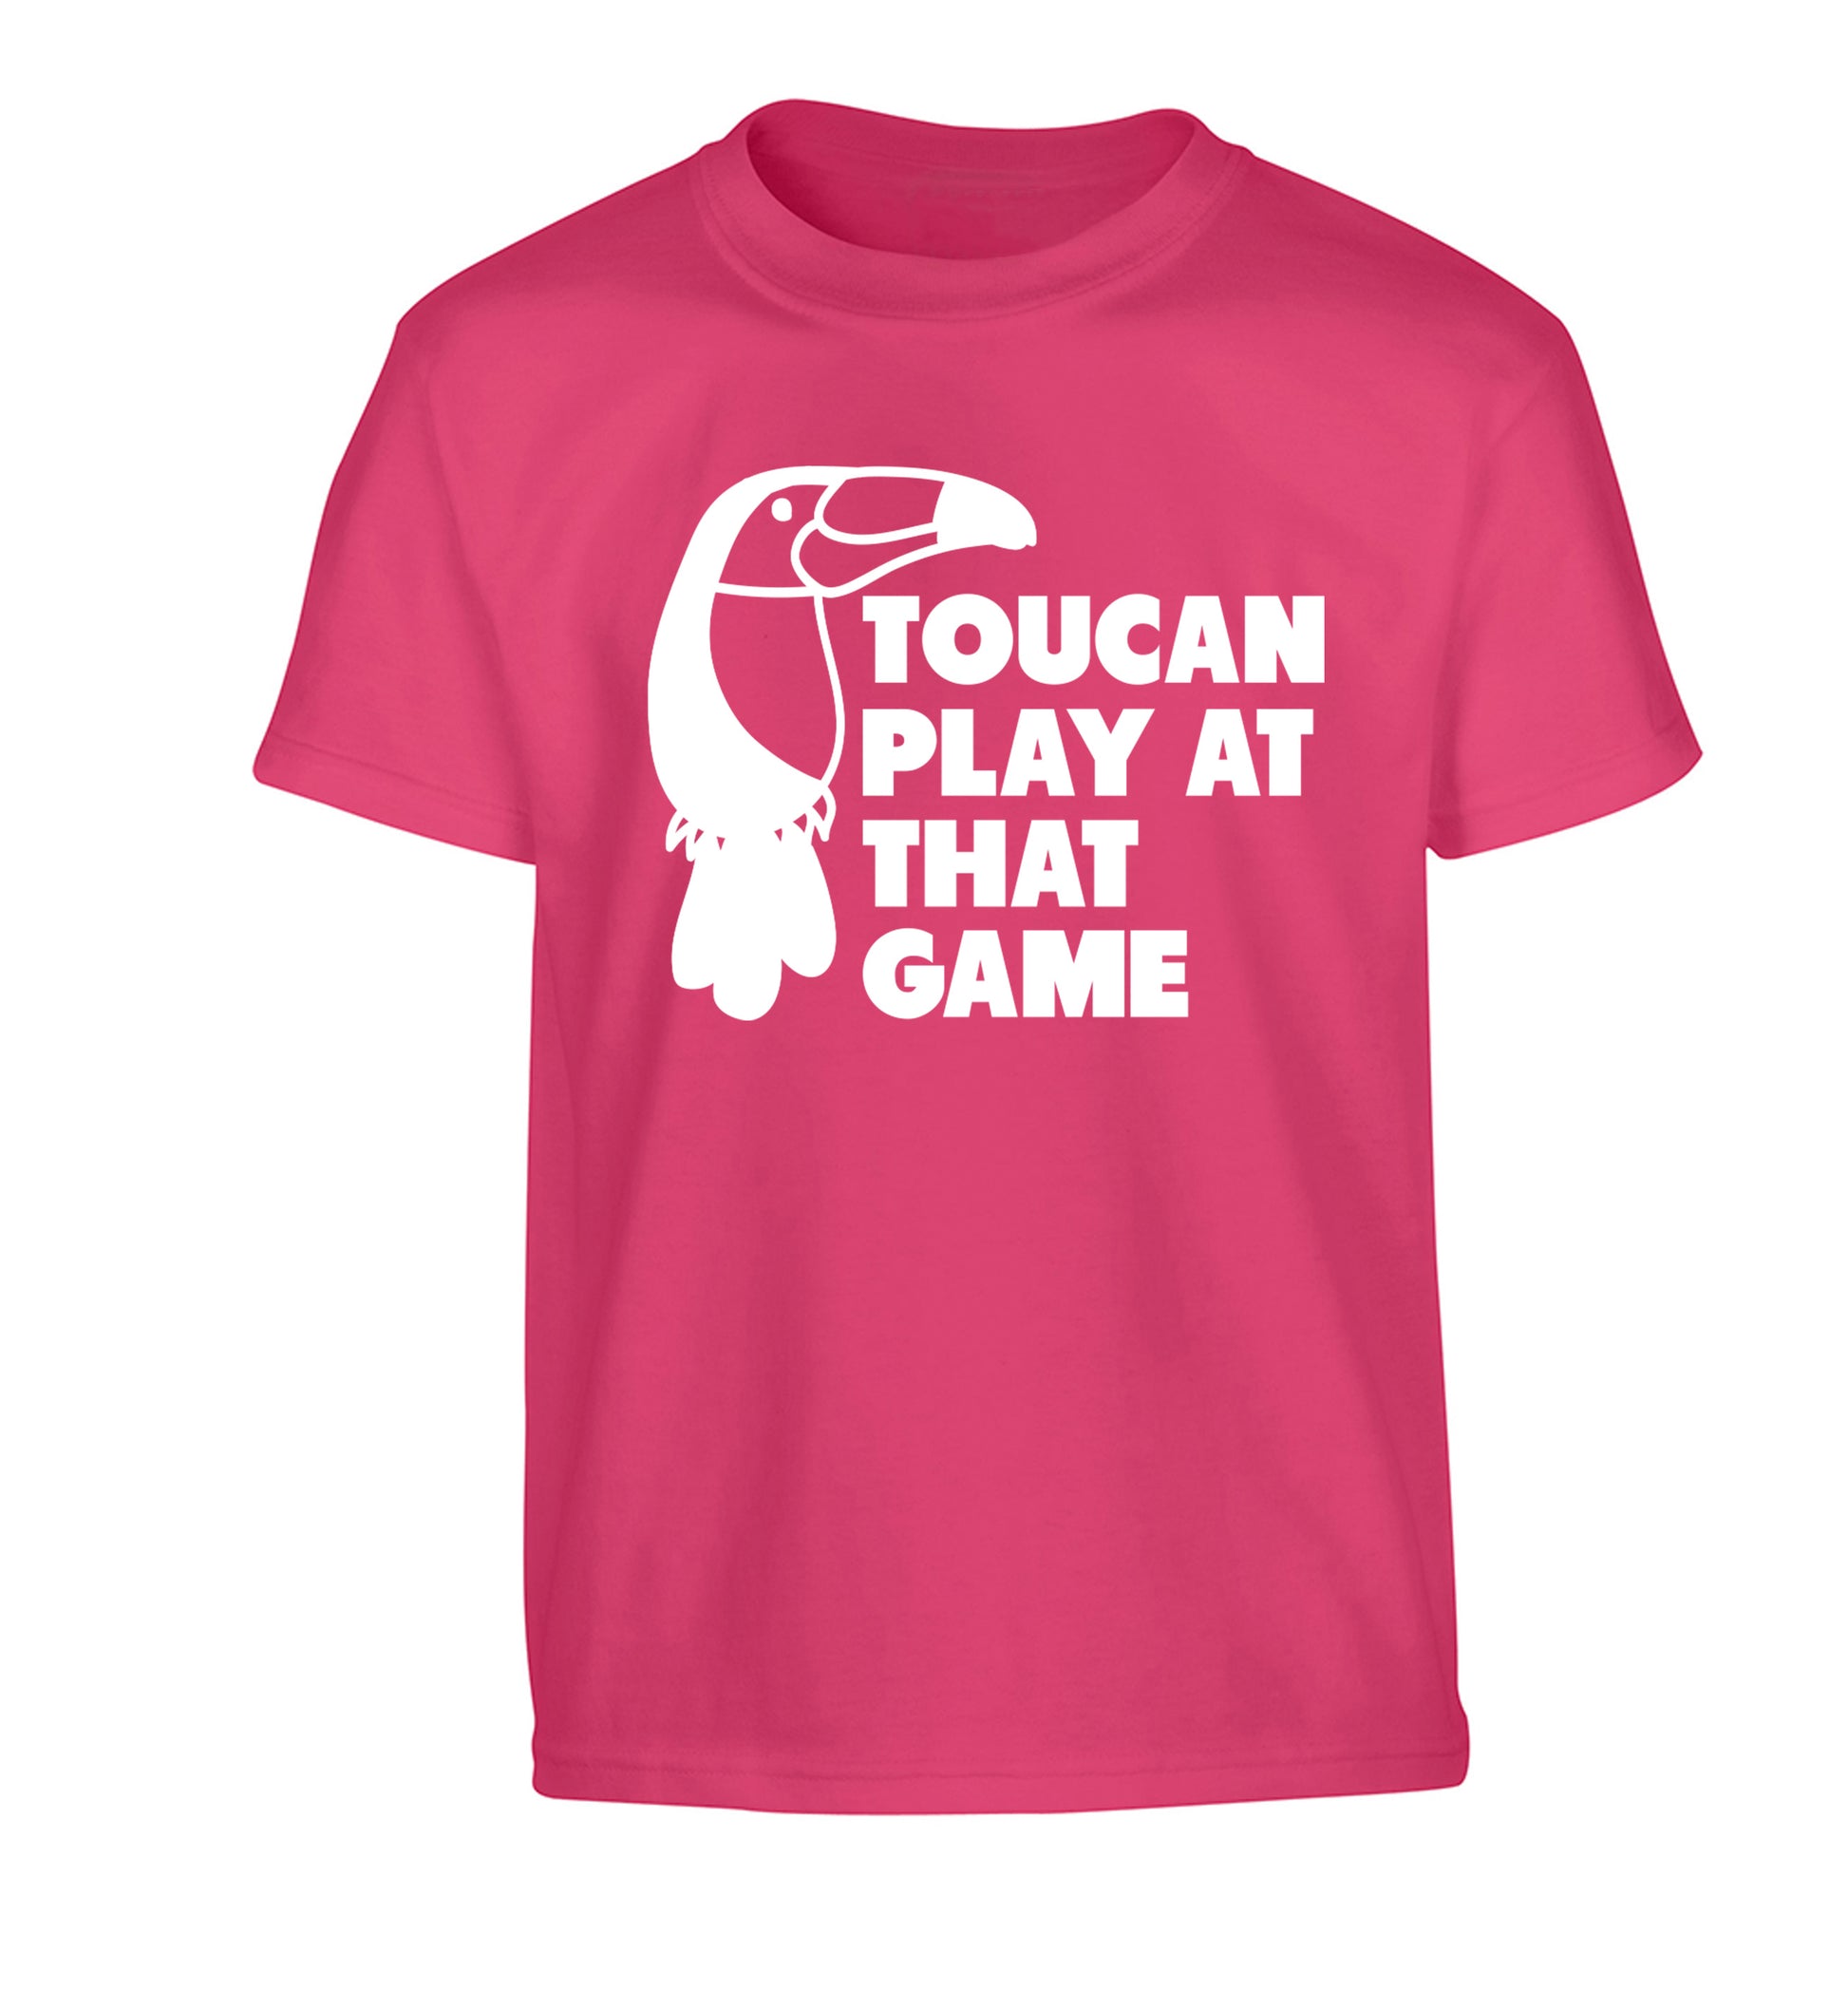 Toucan play at that game Children's pink Tshirt 12-13 Years